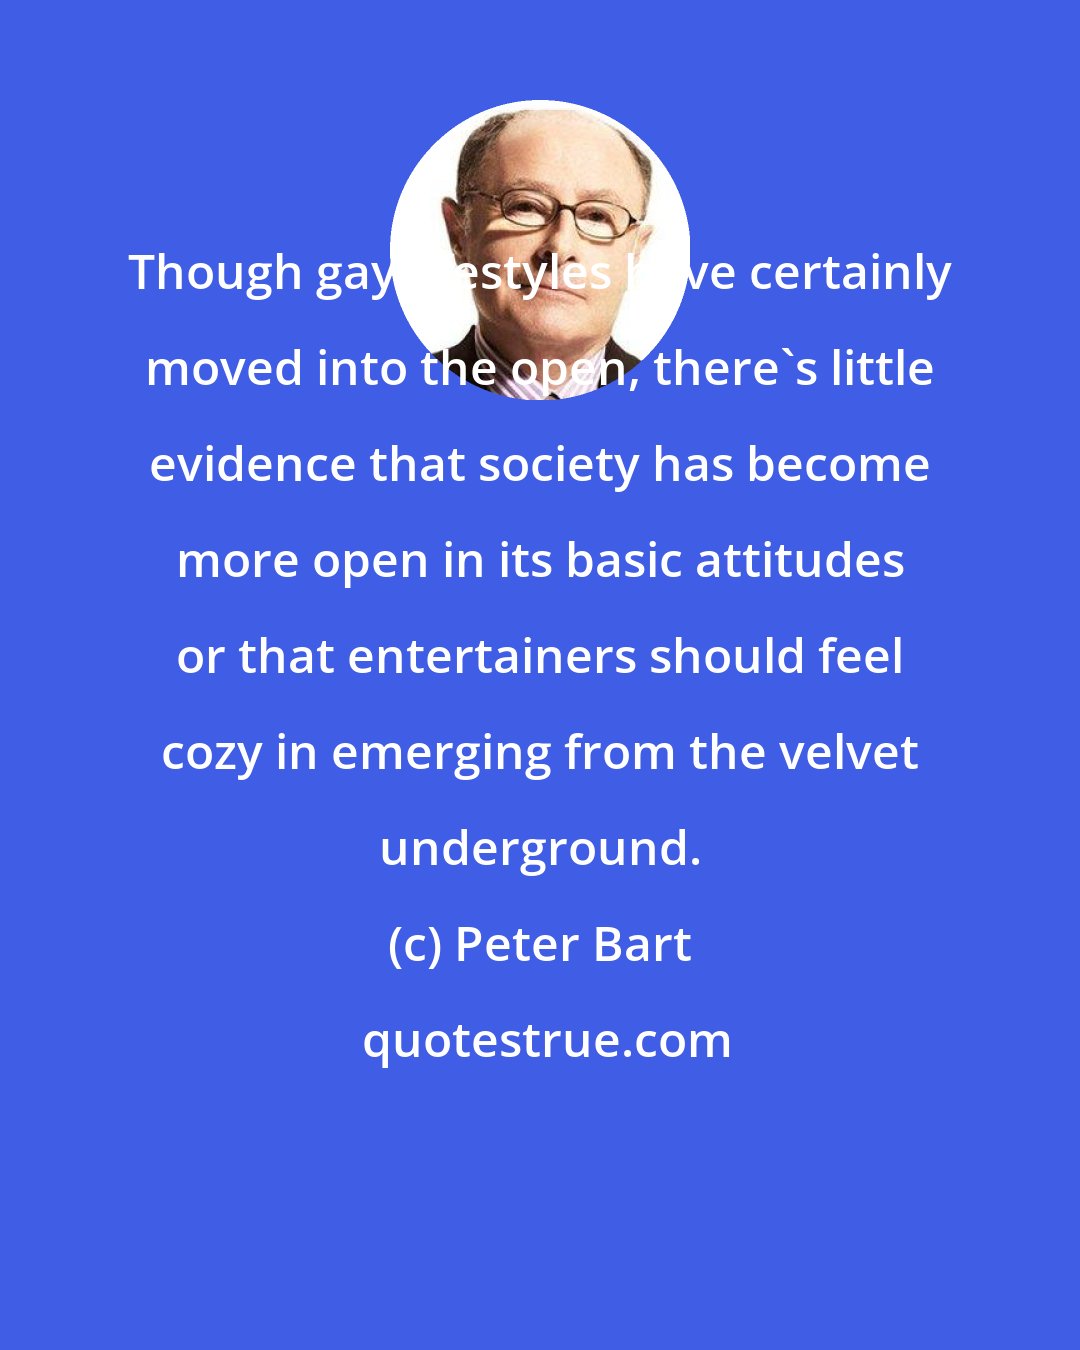 Peter Bart: Though gay lifestyles have certainly moved into the open, there's little evidence that society has become more open in its basic attitudes or that entertainers should feel cozy in emerging from the velvet underground.